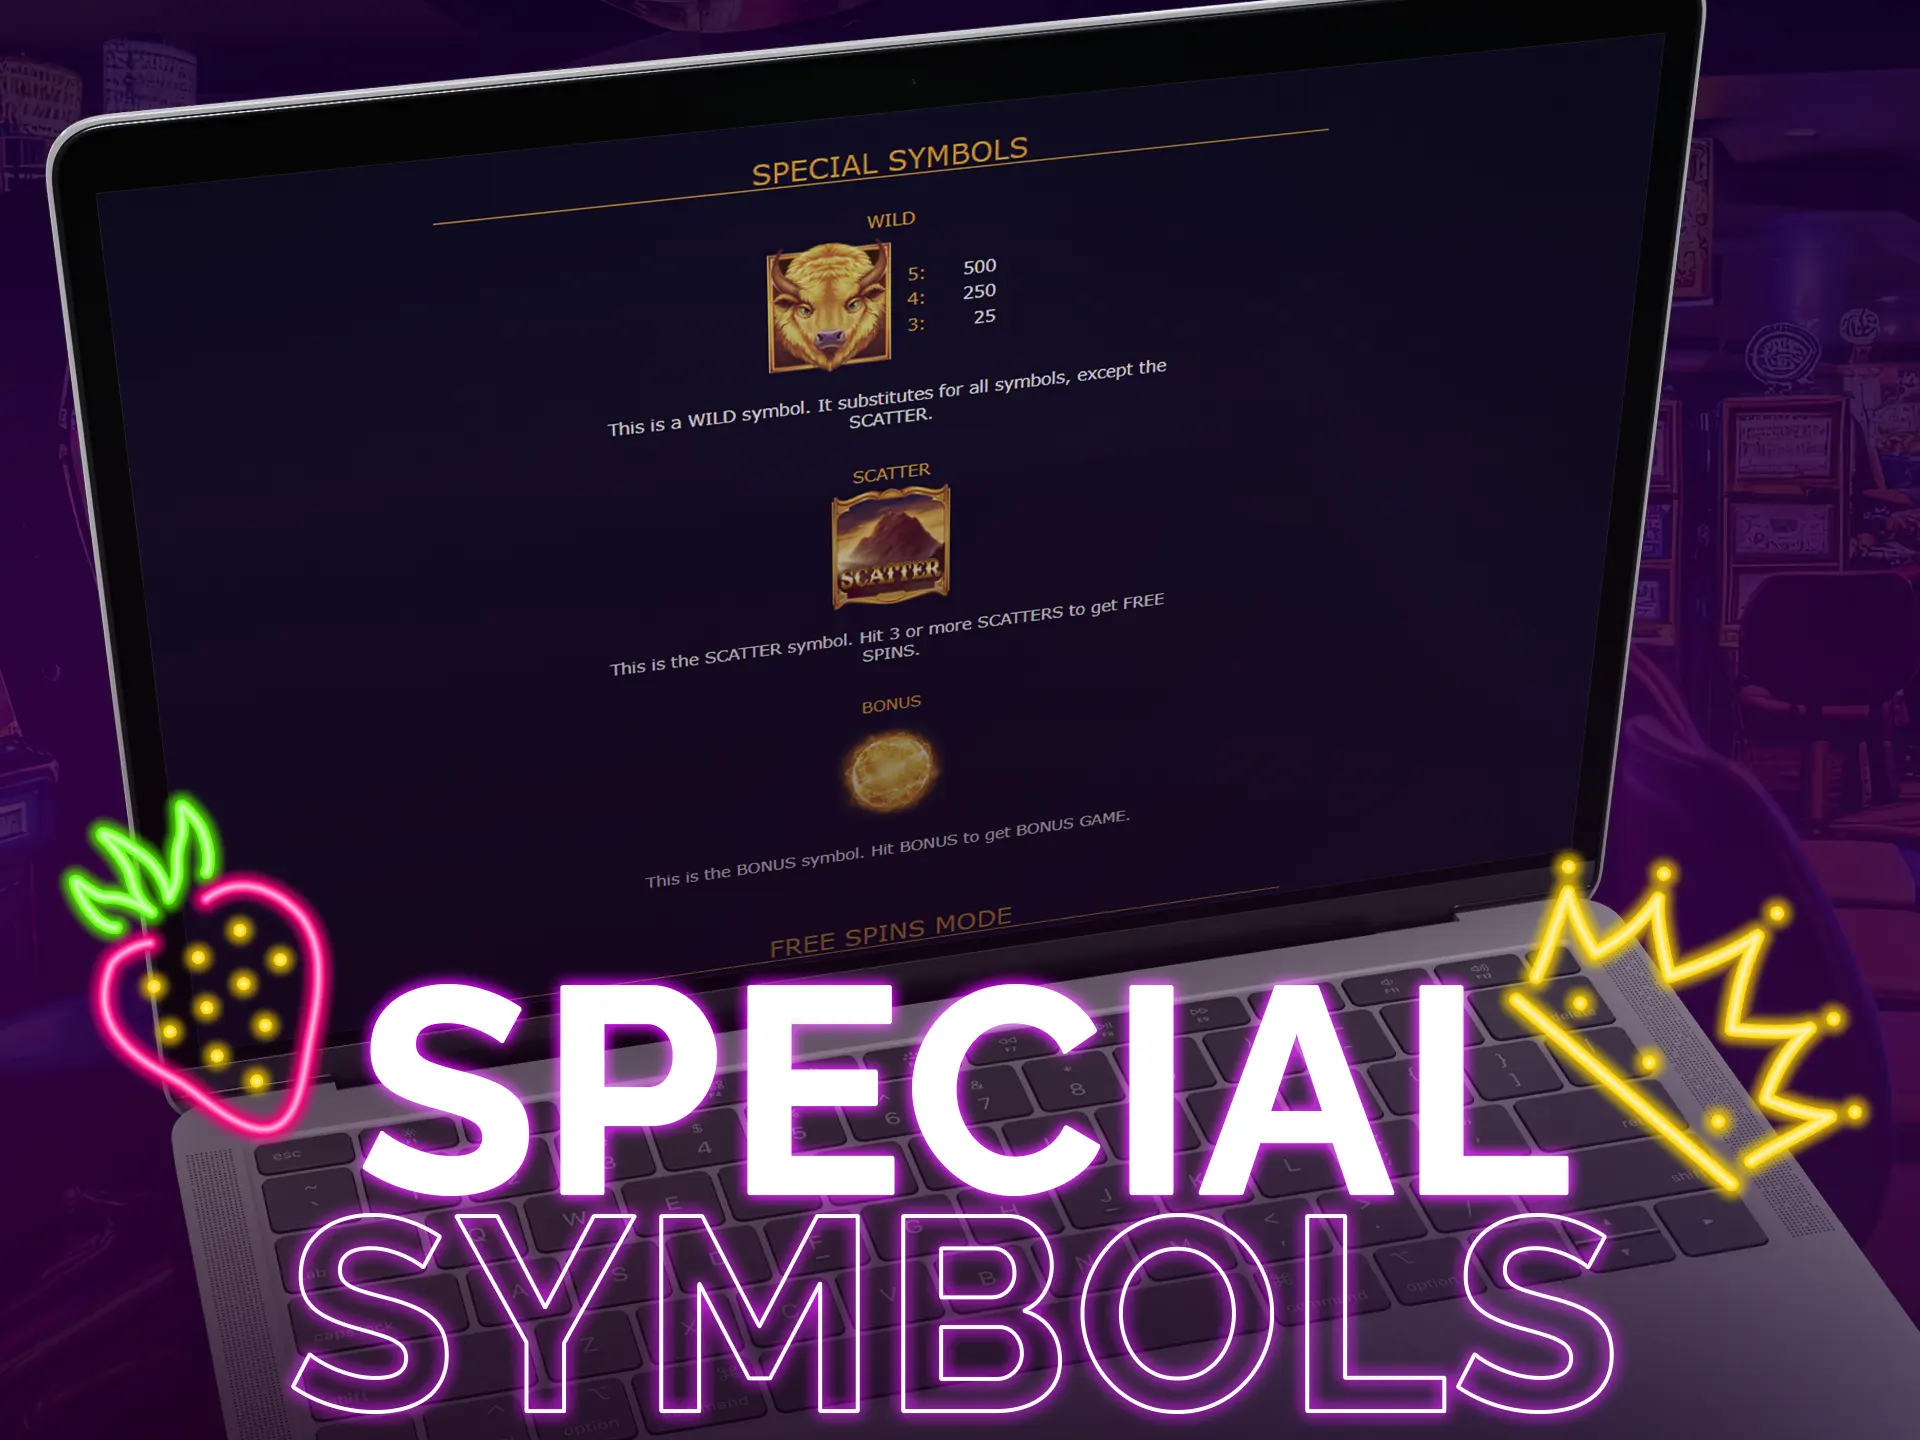 Special symbols in slots include Wild, Scatter, and Multiplier for various functions.